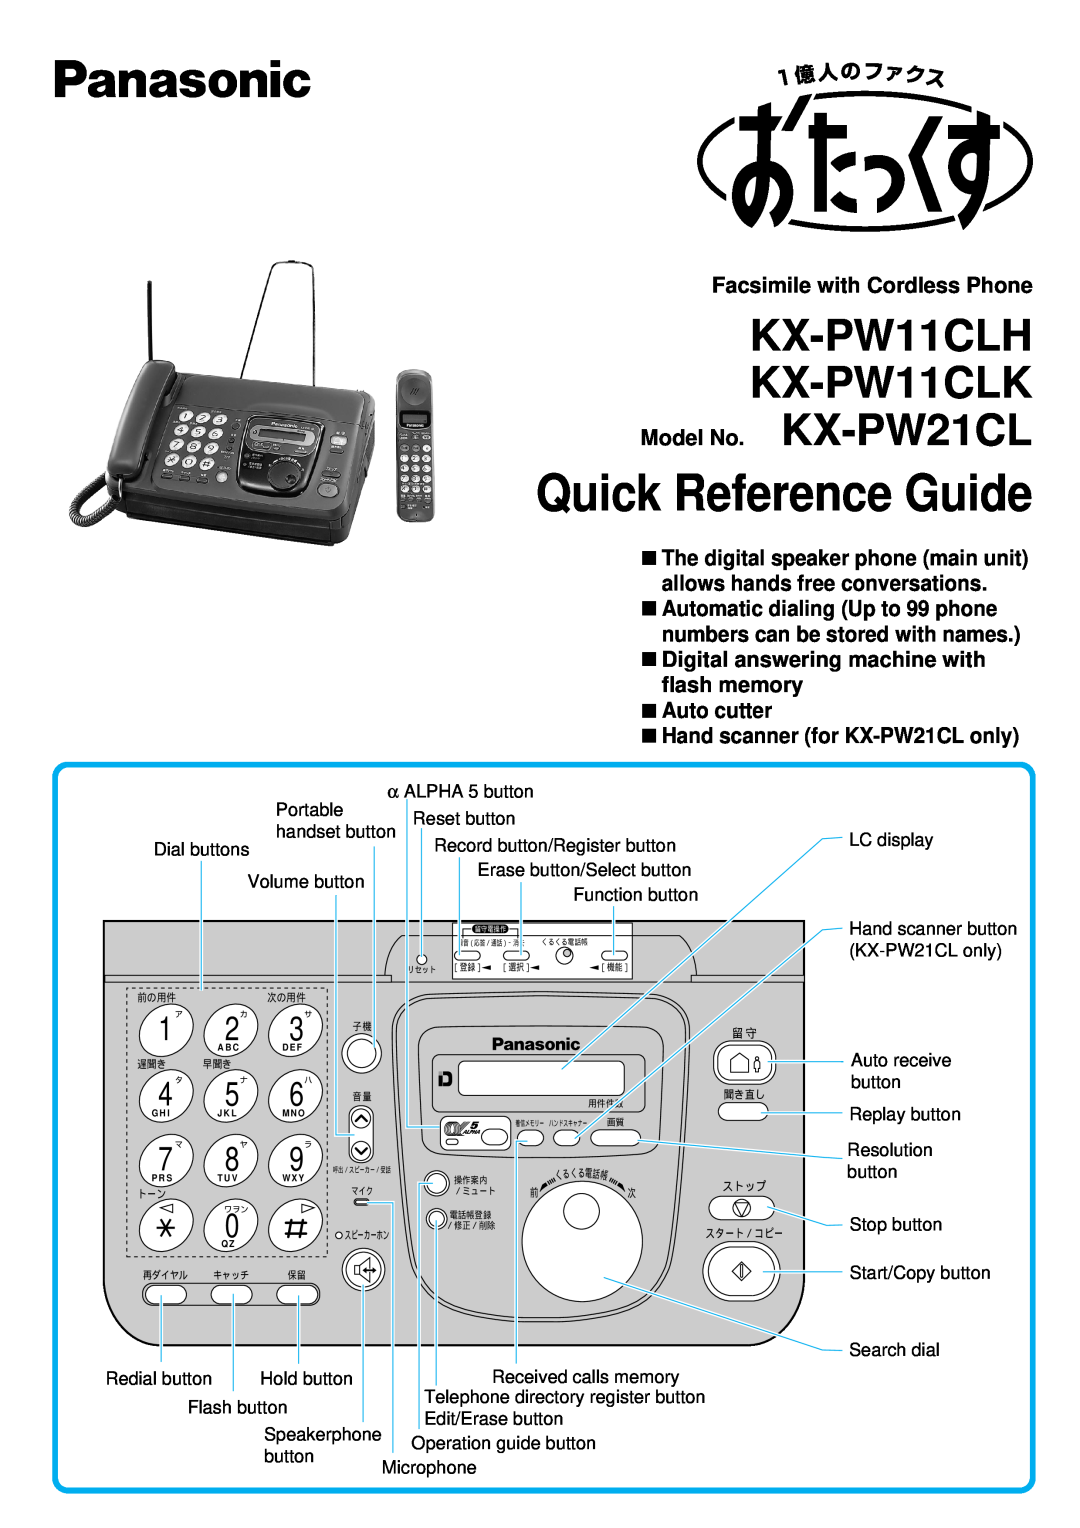 Panasonic KX-PW11CLH manual Facsimile with Cordless Phone, Model No. KX-PW21CL, Hand scanner for KX-PW21CL only 